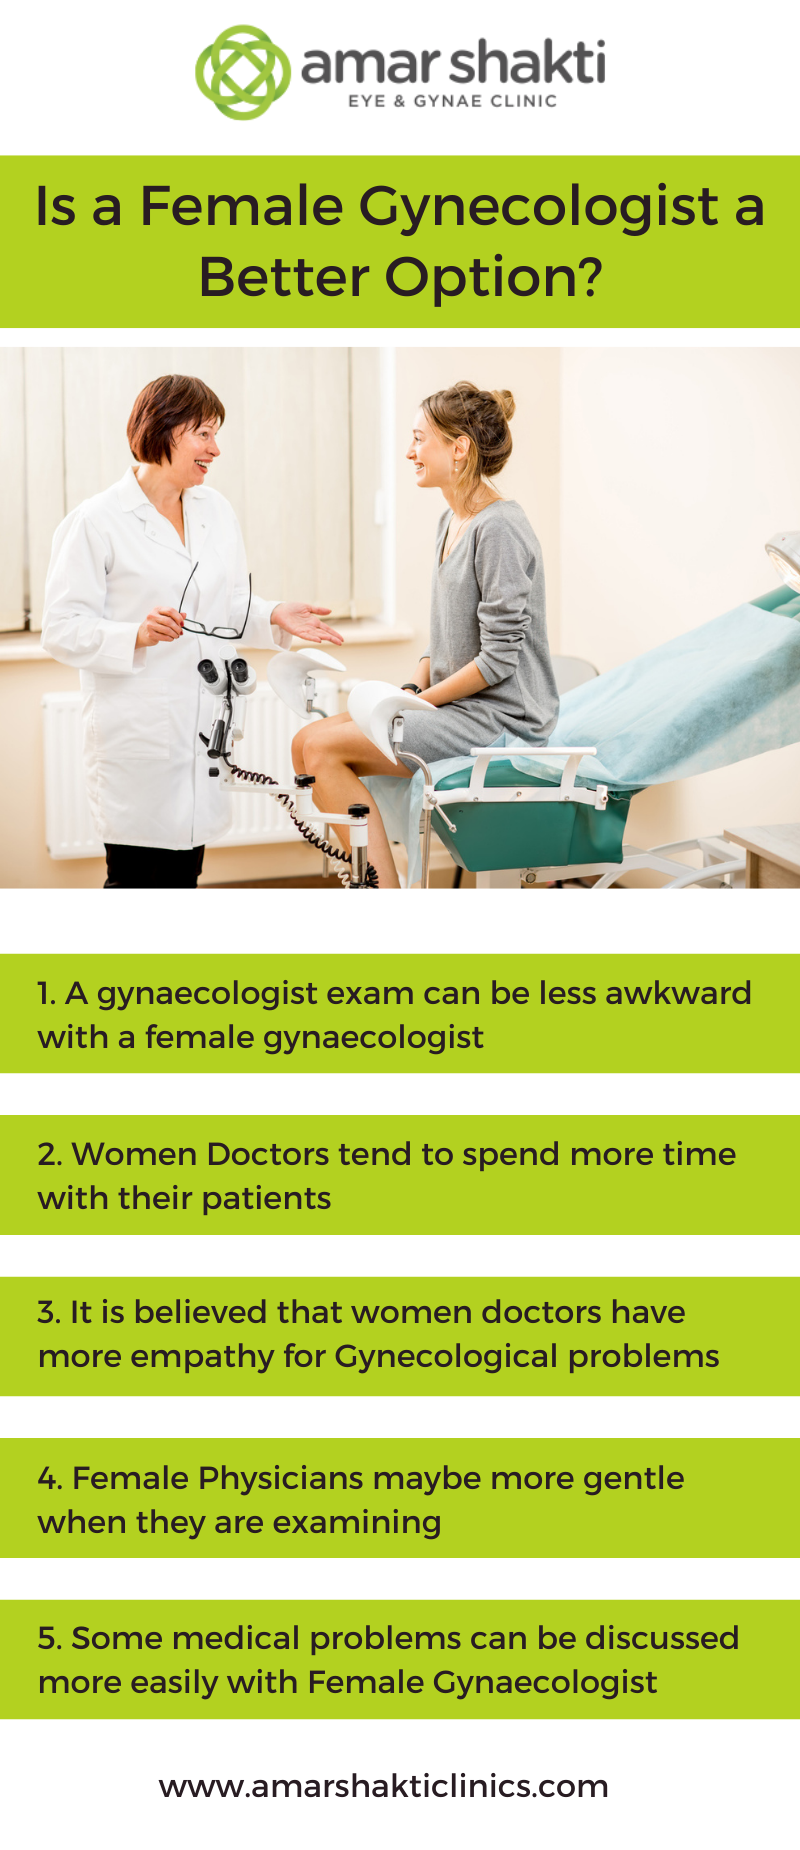 Is a Female Gynecologist a Better Option?